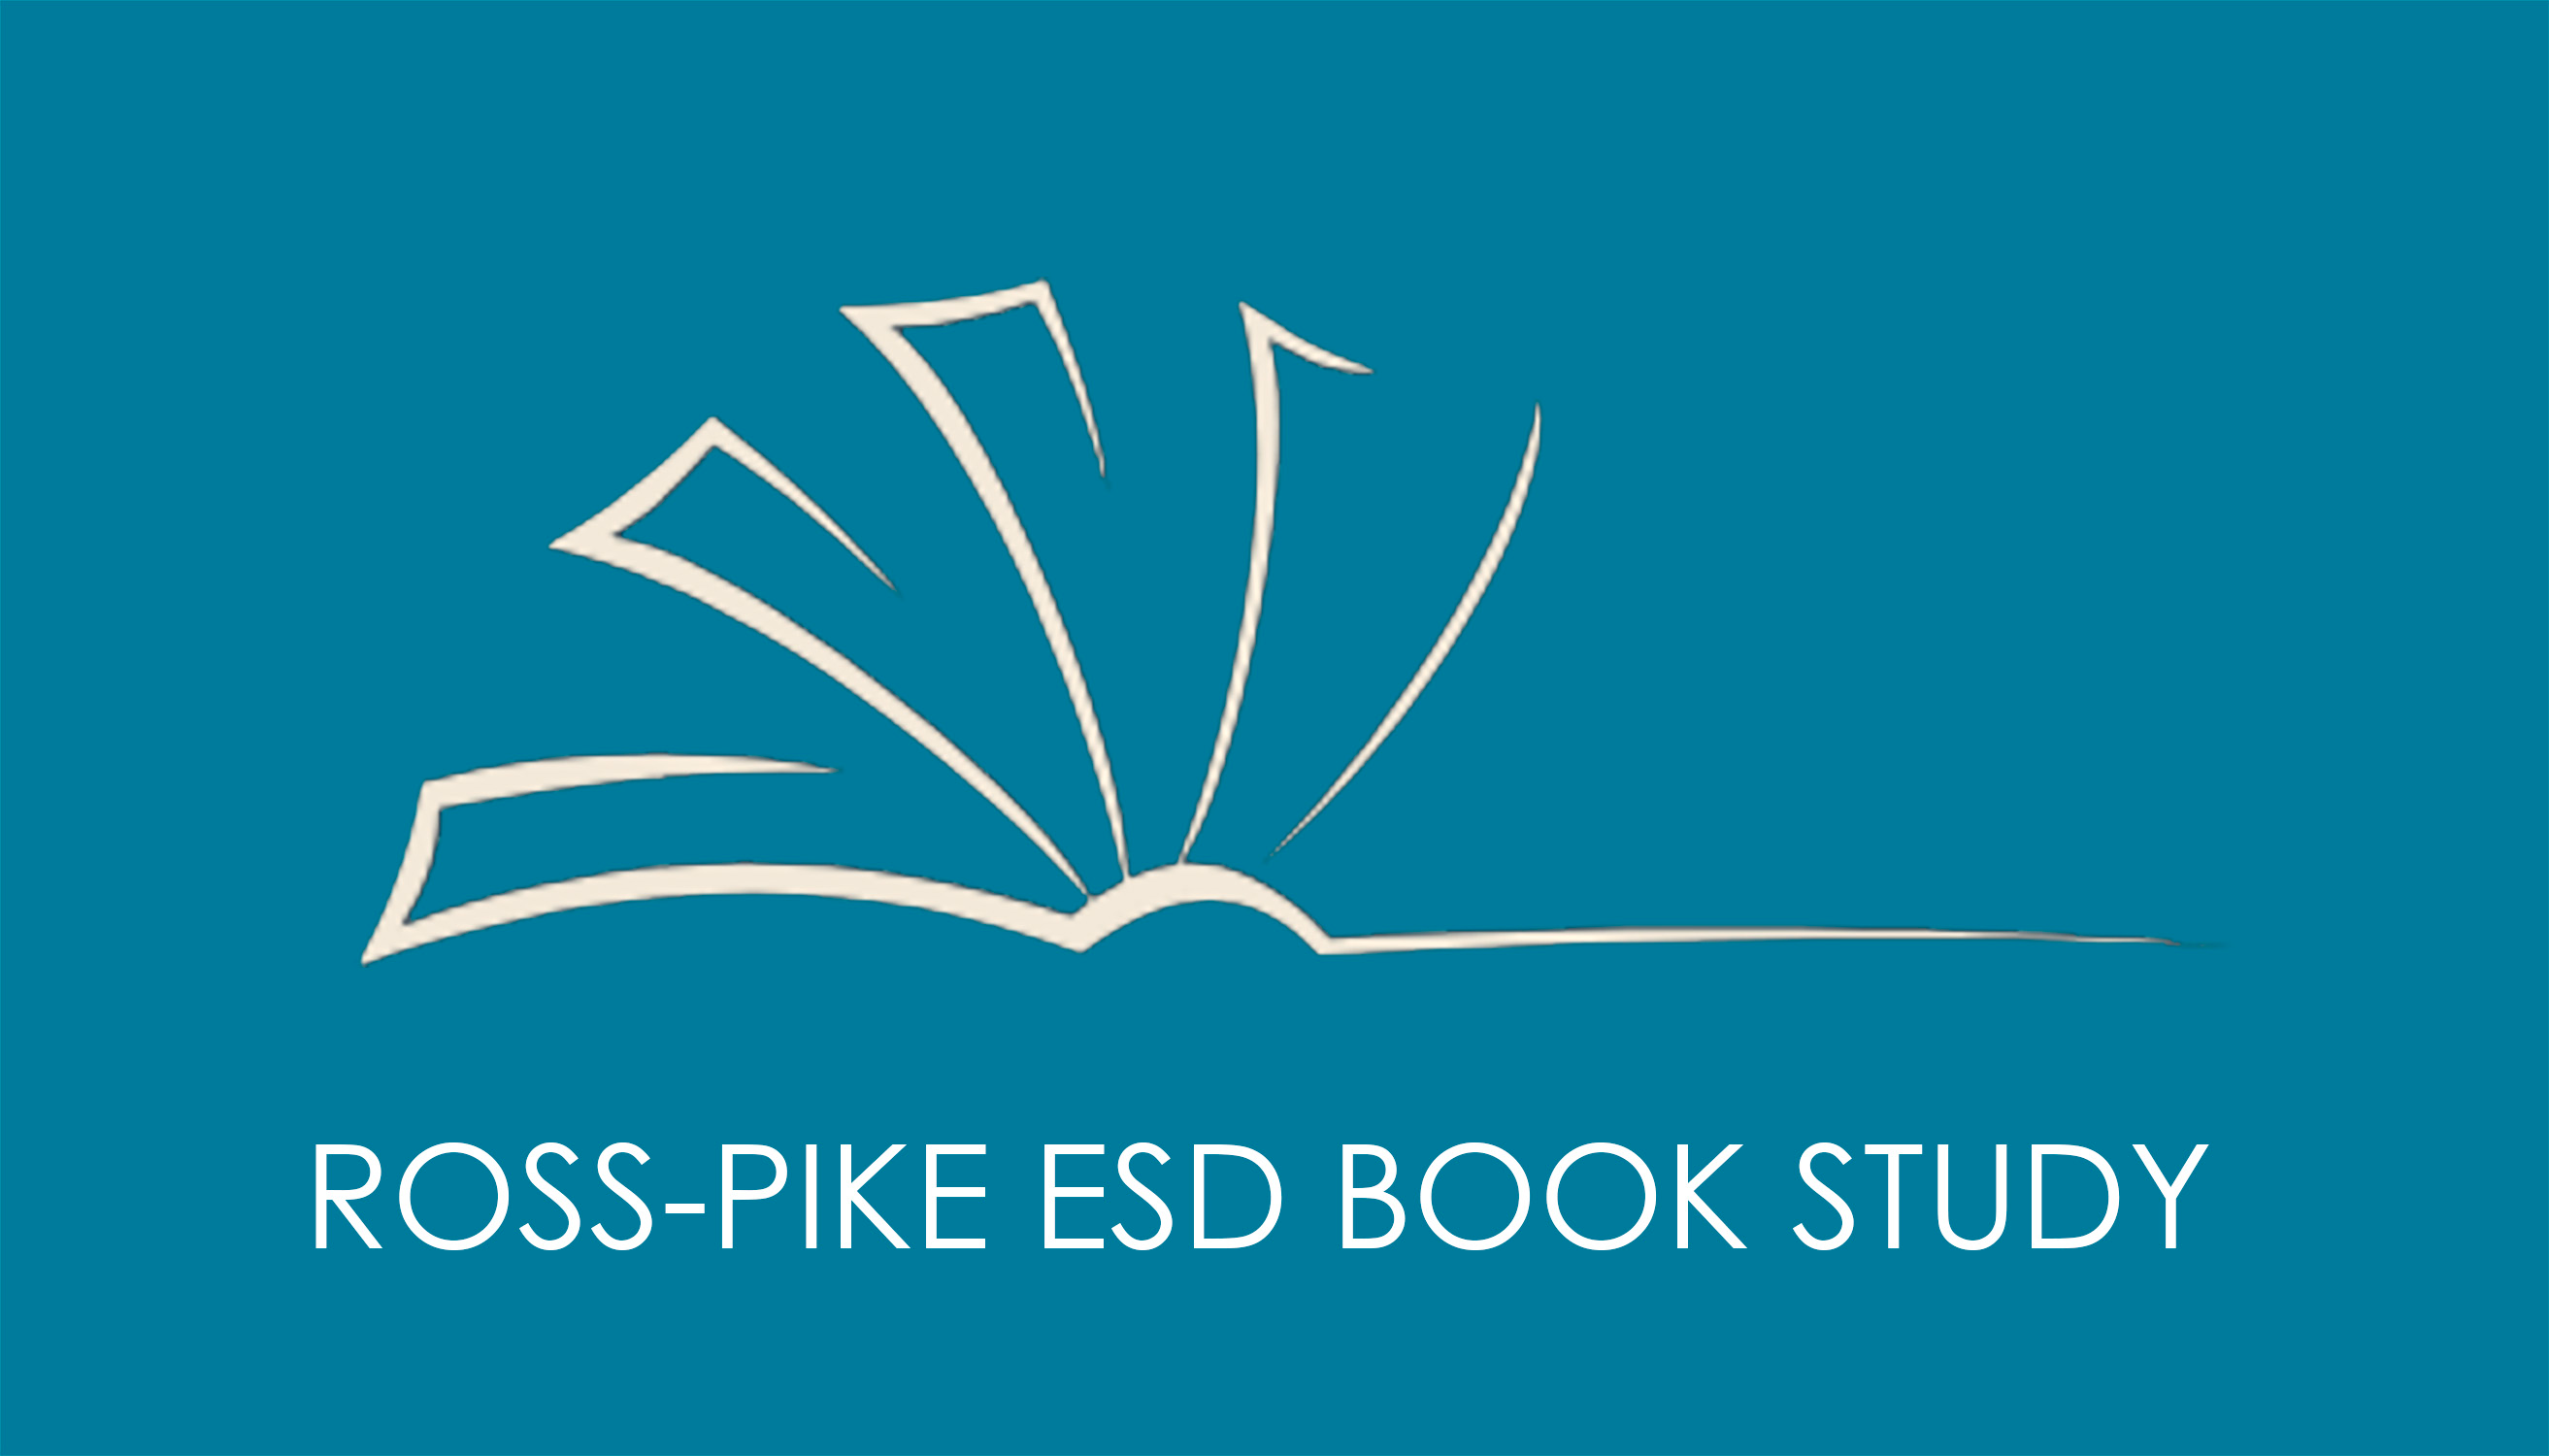 Ross-Pike ESD Book Study